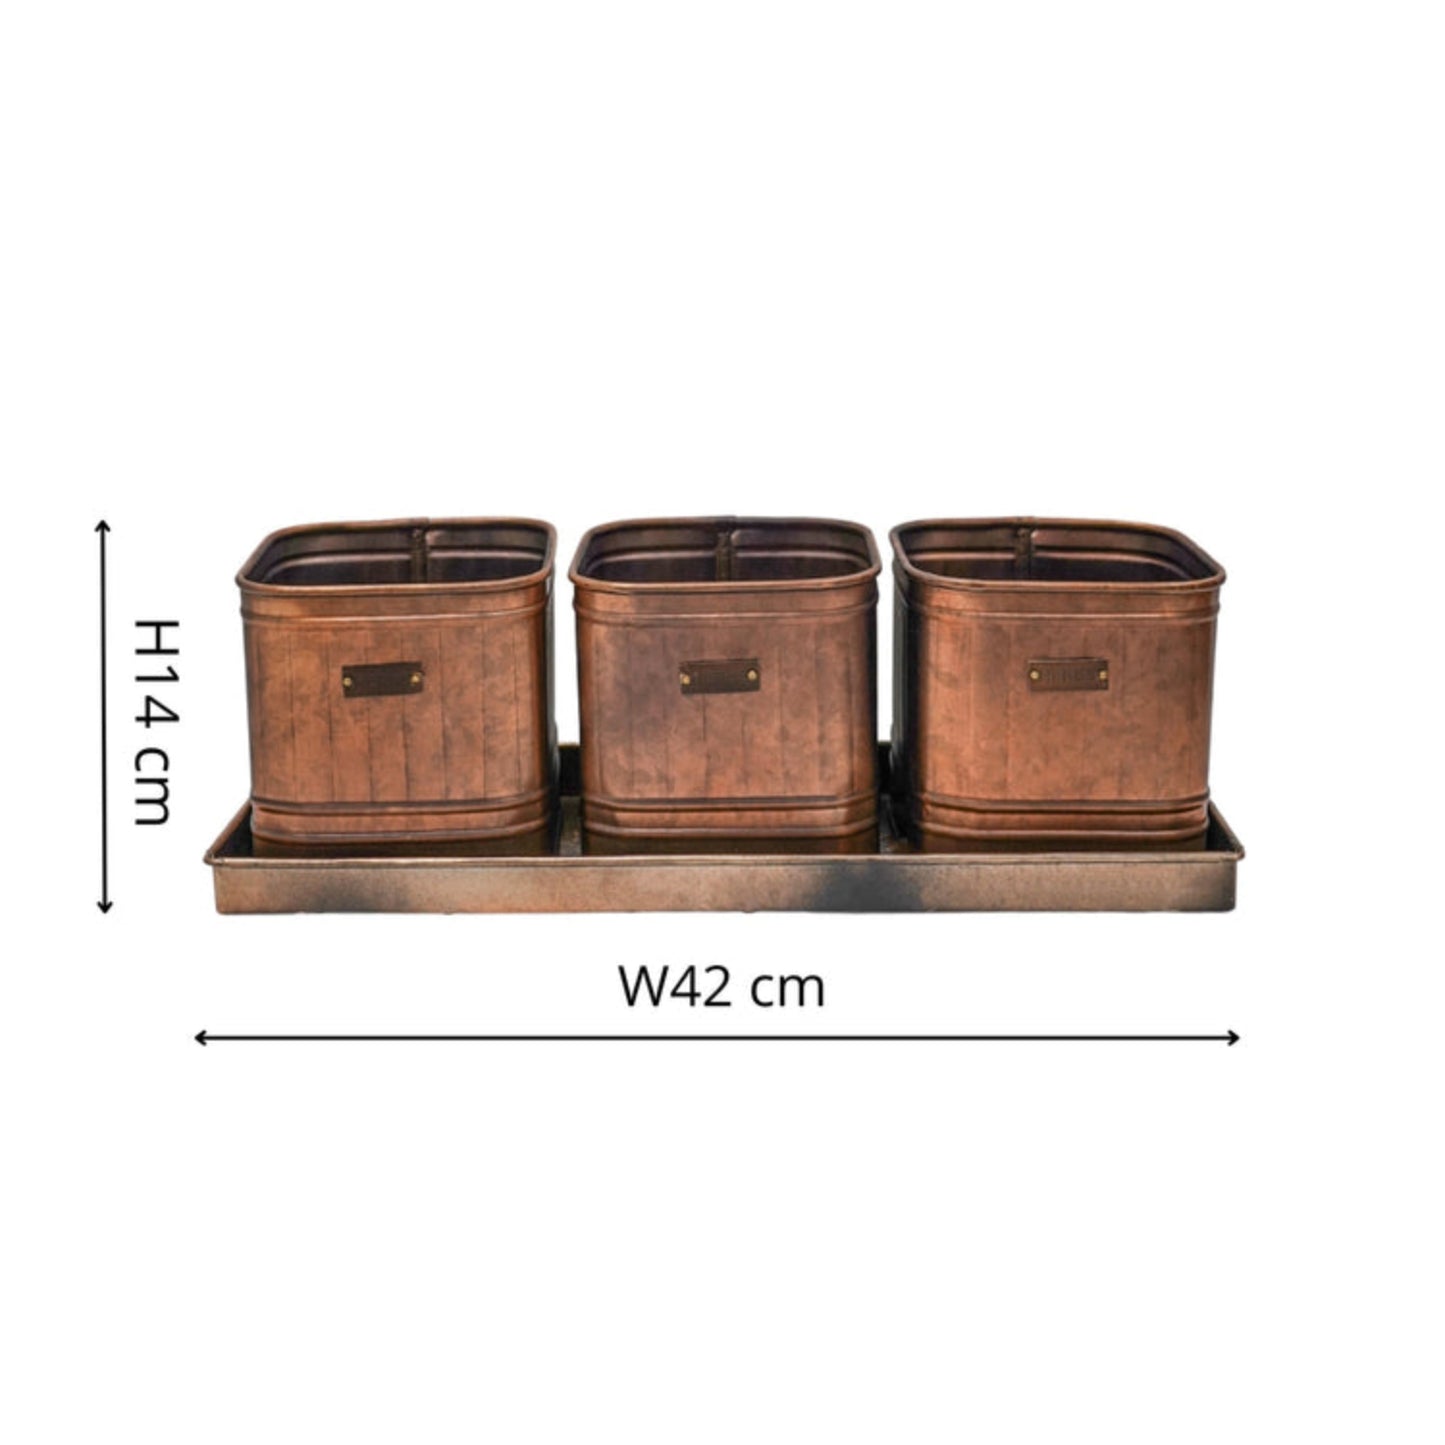 Set of 3 Outdoor Hampton Copper Herb Planters with Tray